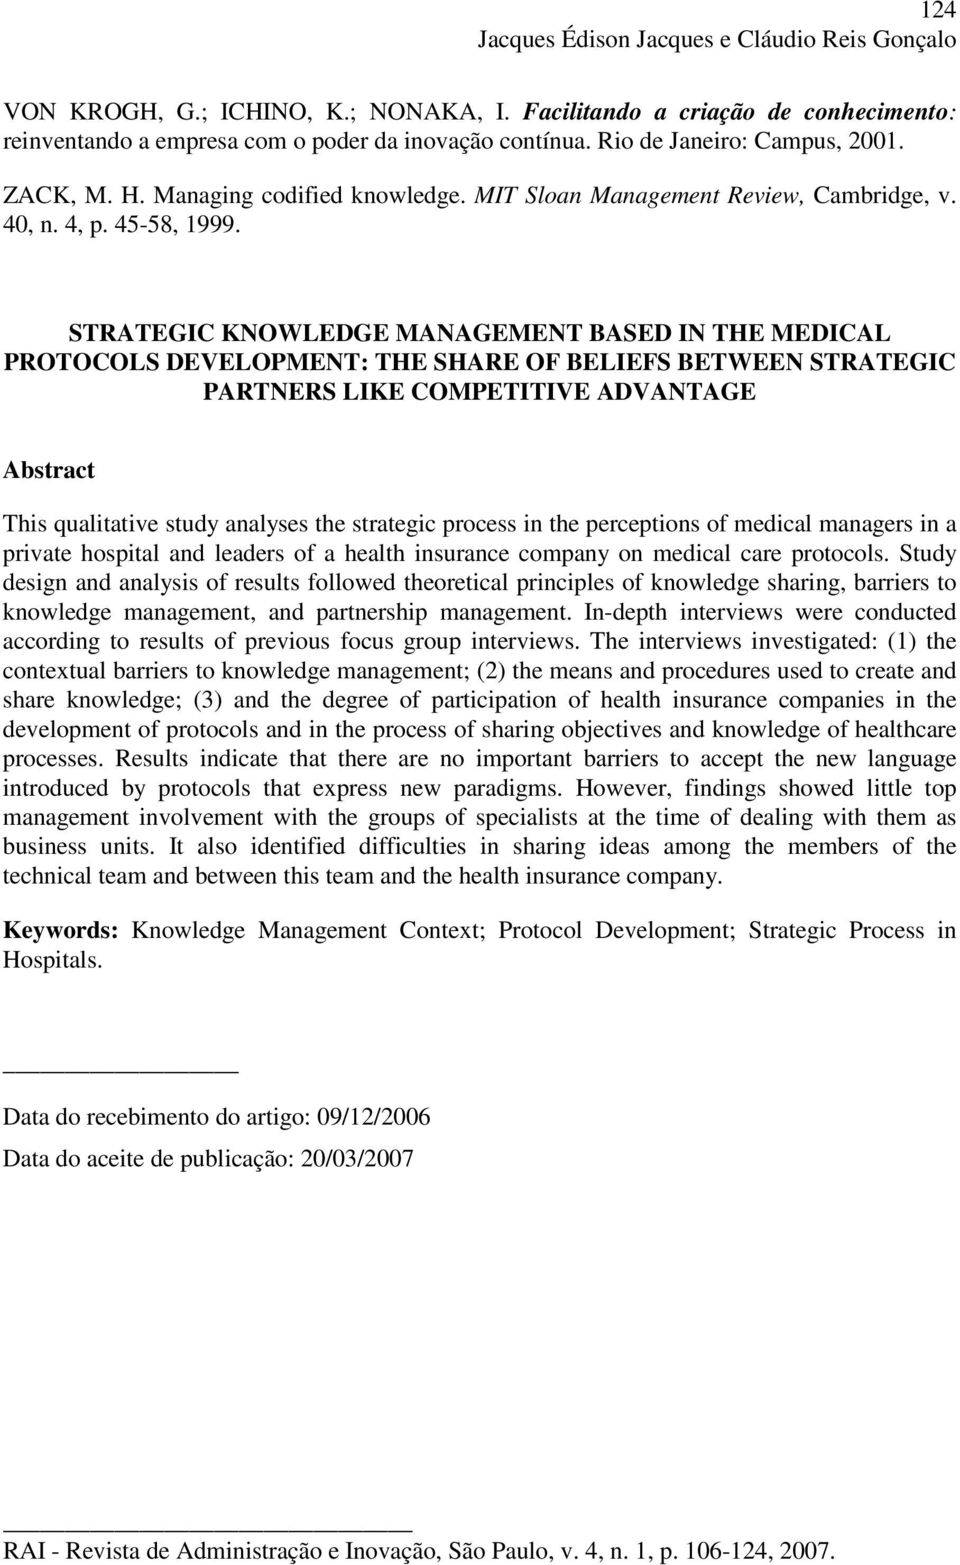 STRATEGIC KNOWLEDGE MANAGEMENT BASED IN THE MEDICAL PROTOCOLS DEVELOPMENT: THE SHARE OF BELIEFS BETWEEN STRATEGIC PARTNERS LIKE COMPETITIVE ADVANTAGE Abstract This qualitative study analyses the